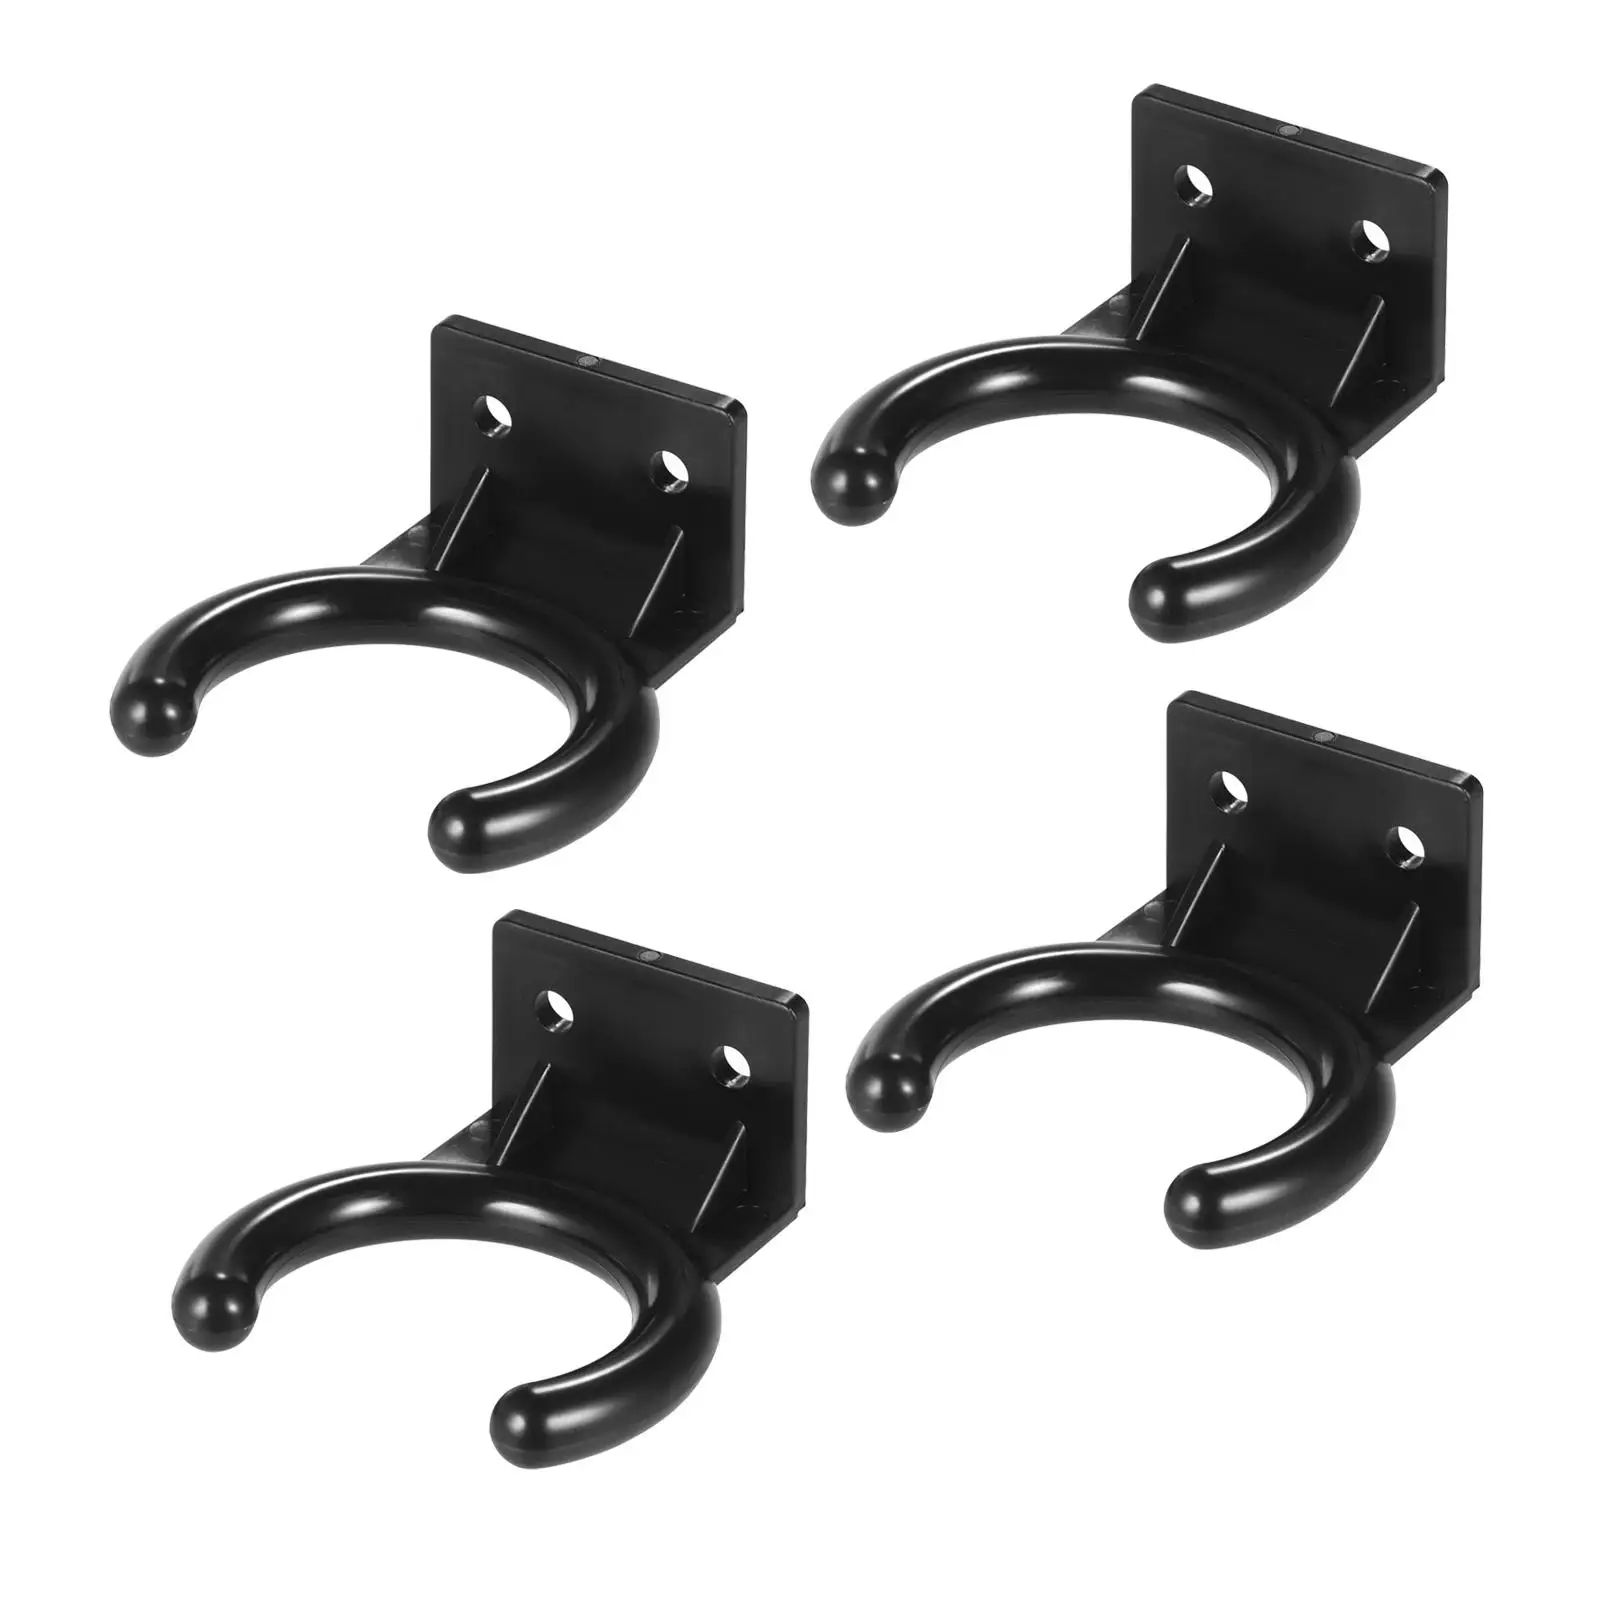 4Pcs Wall Mounted Microphone Hook Wall Hanger Clamp Mic Stands Clip Holder Rack Black Brackets for Home Office KTV